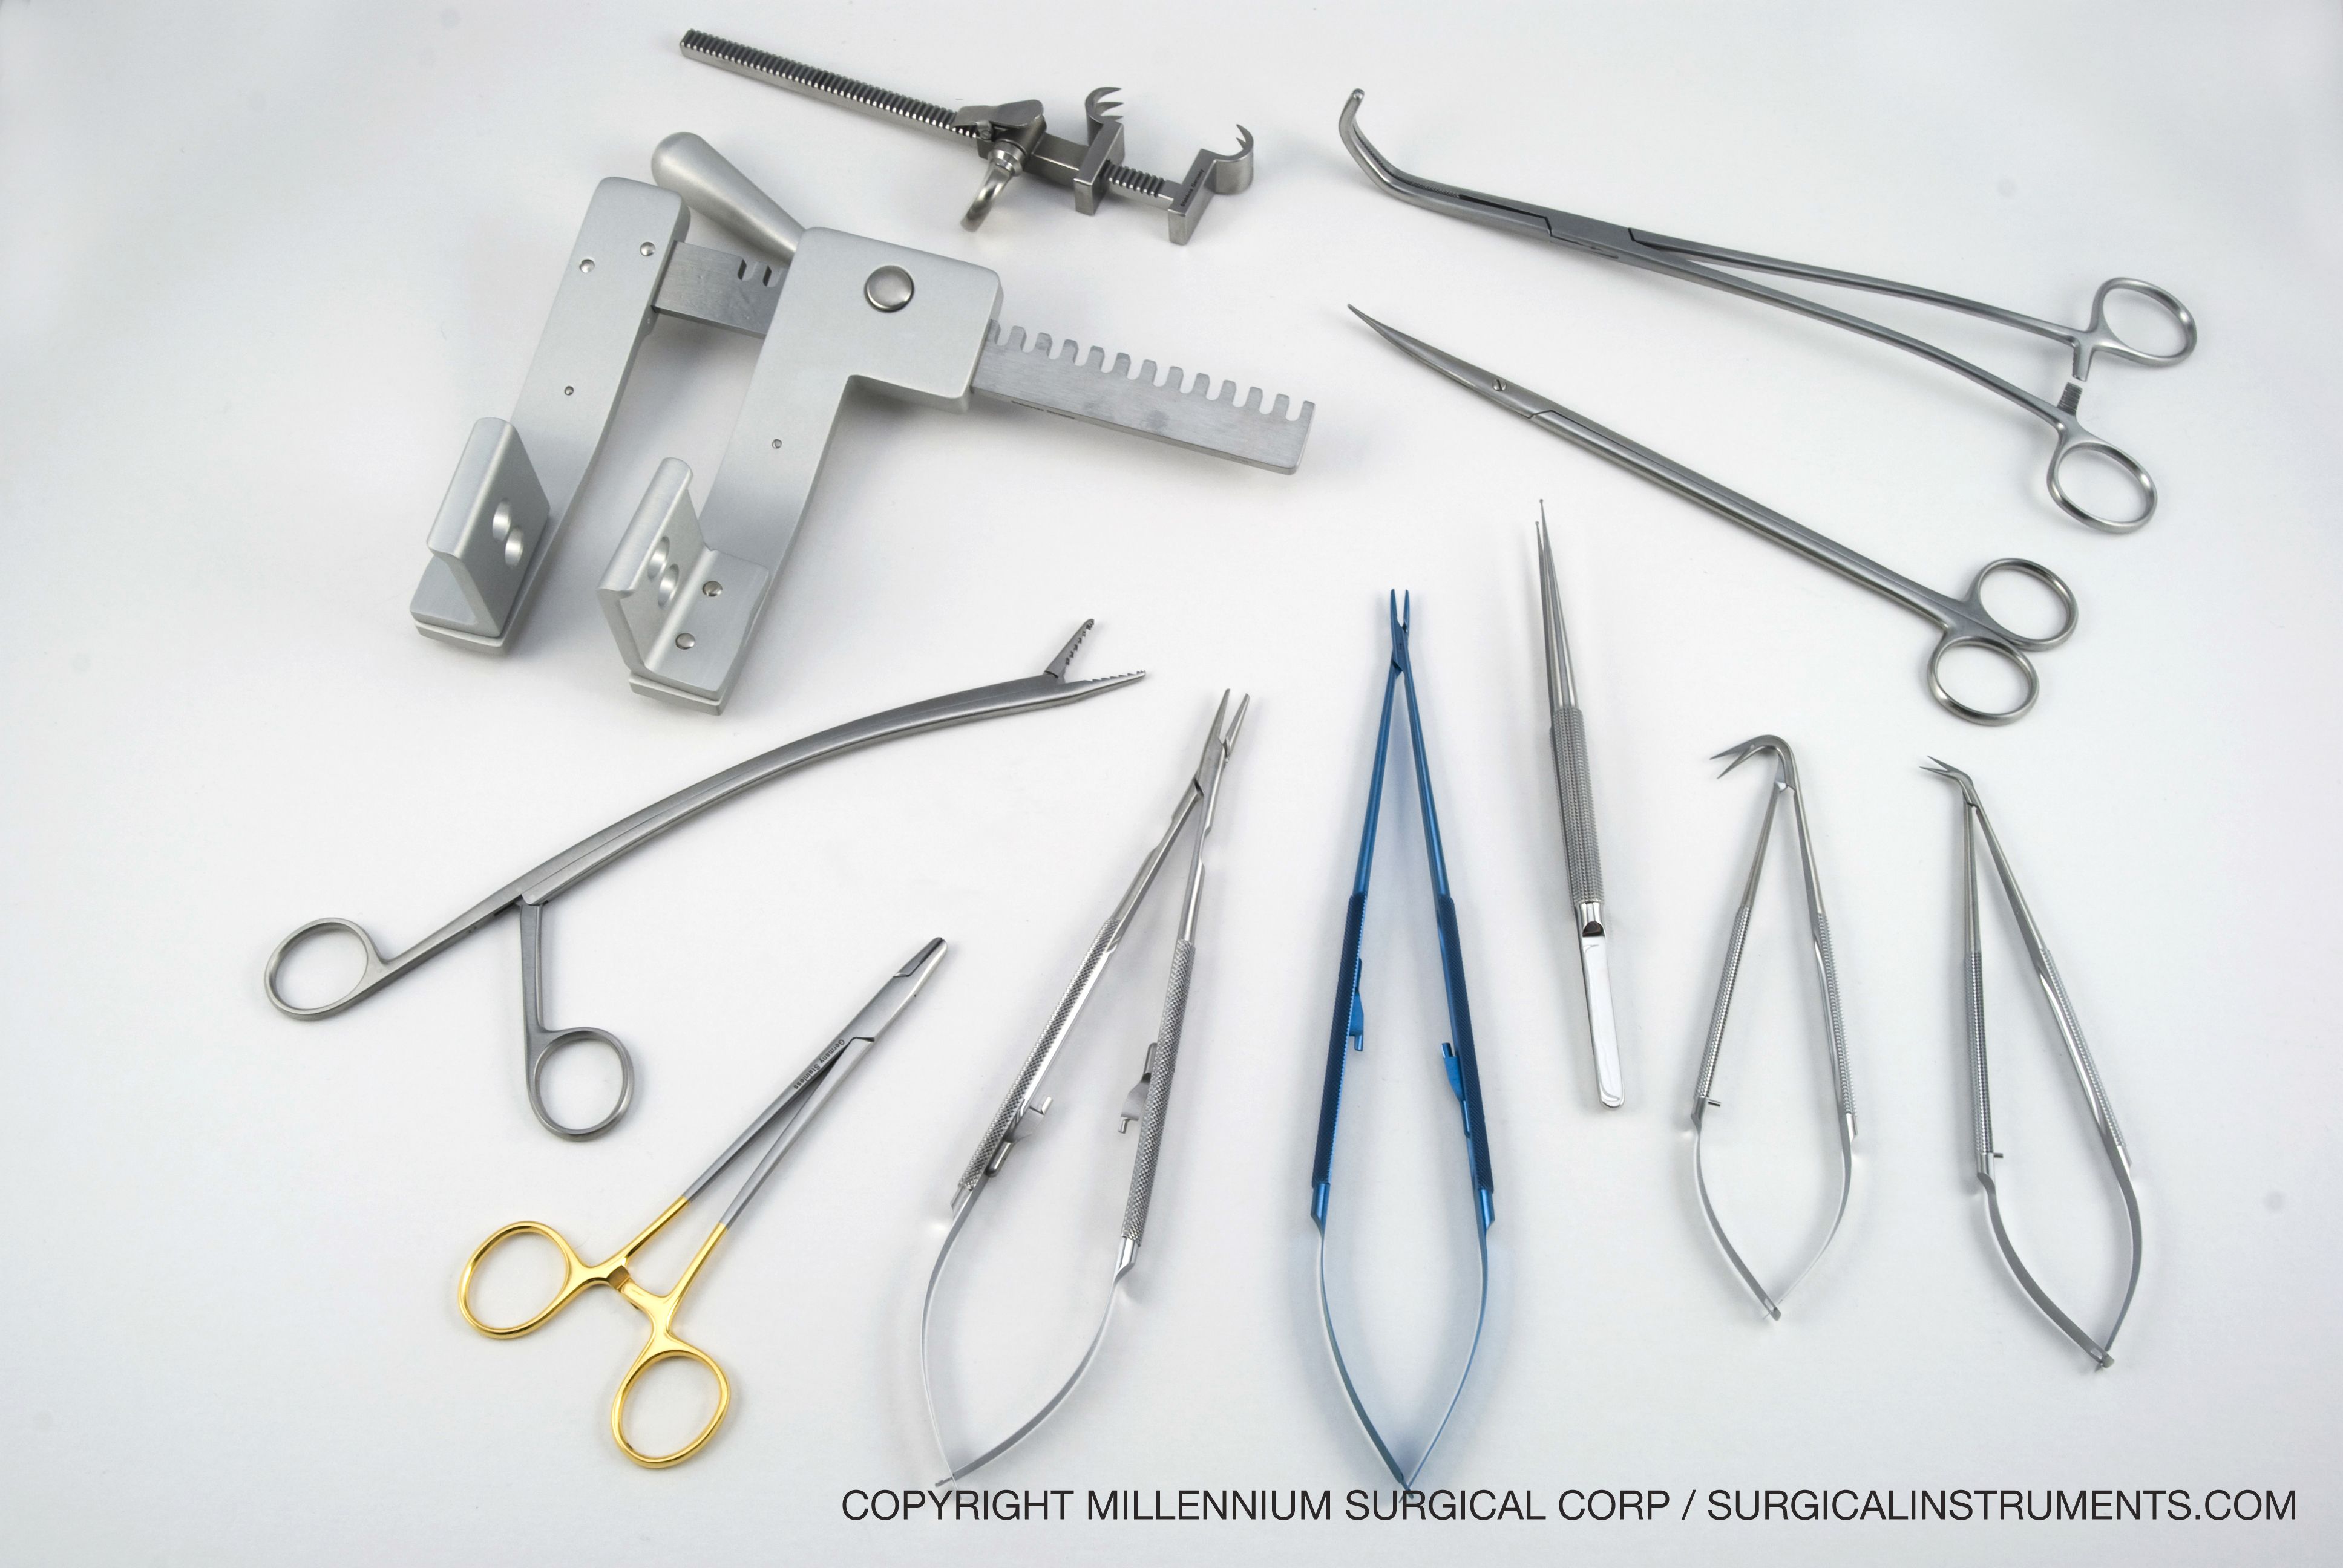 Cardiovascular Surgical Instruments | Surgical Instruments ...